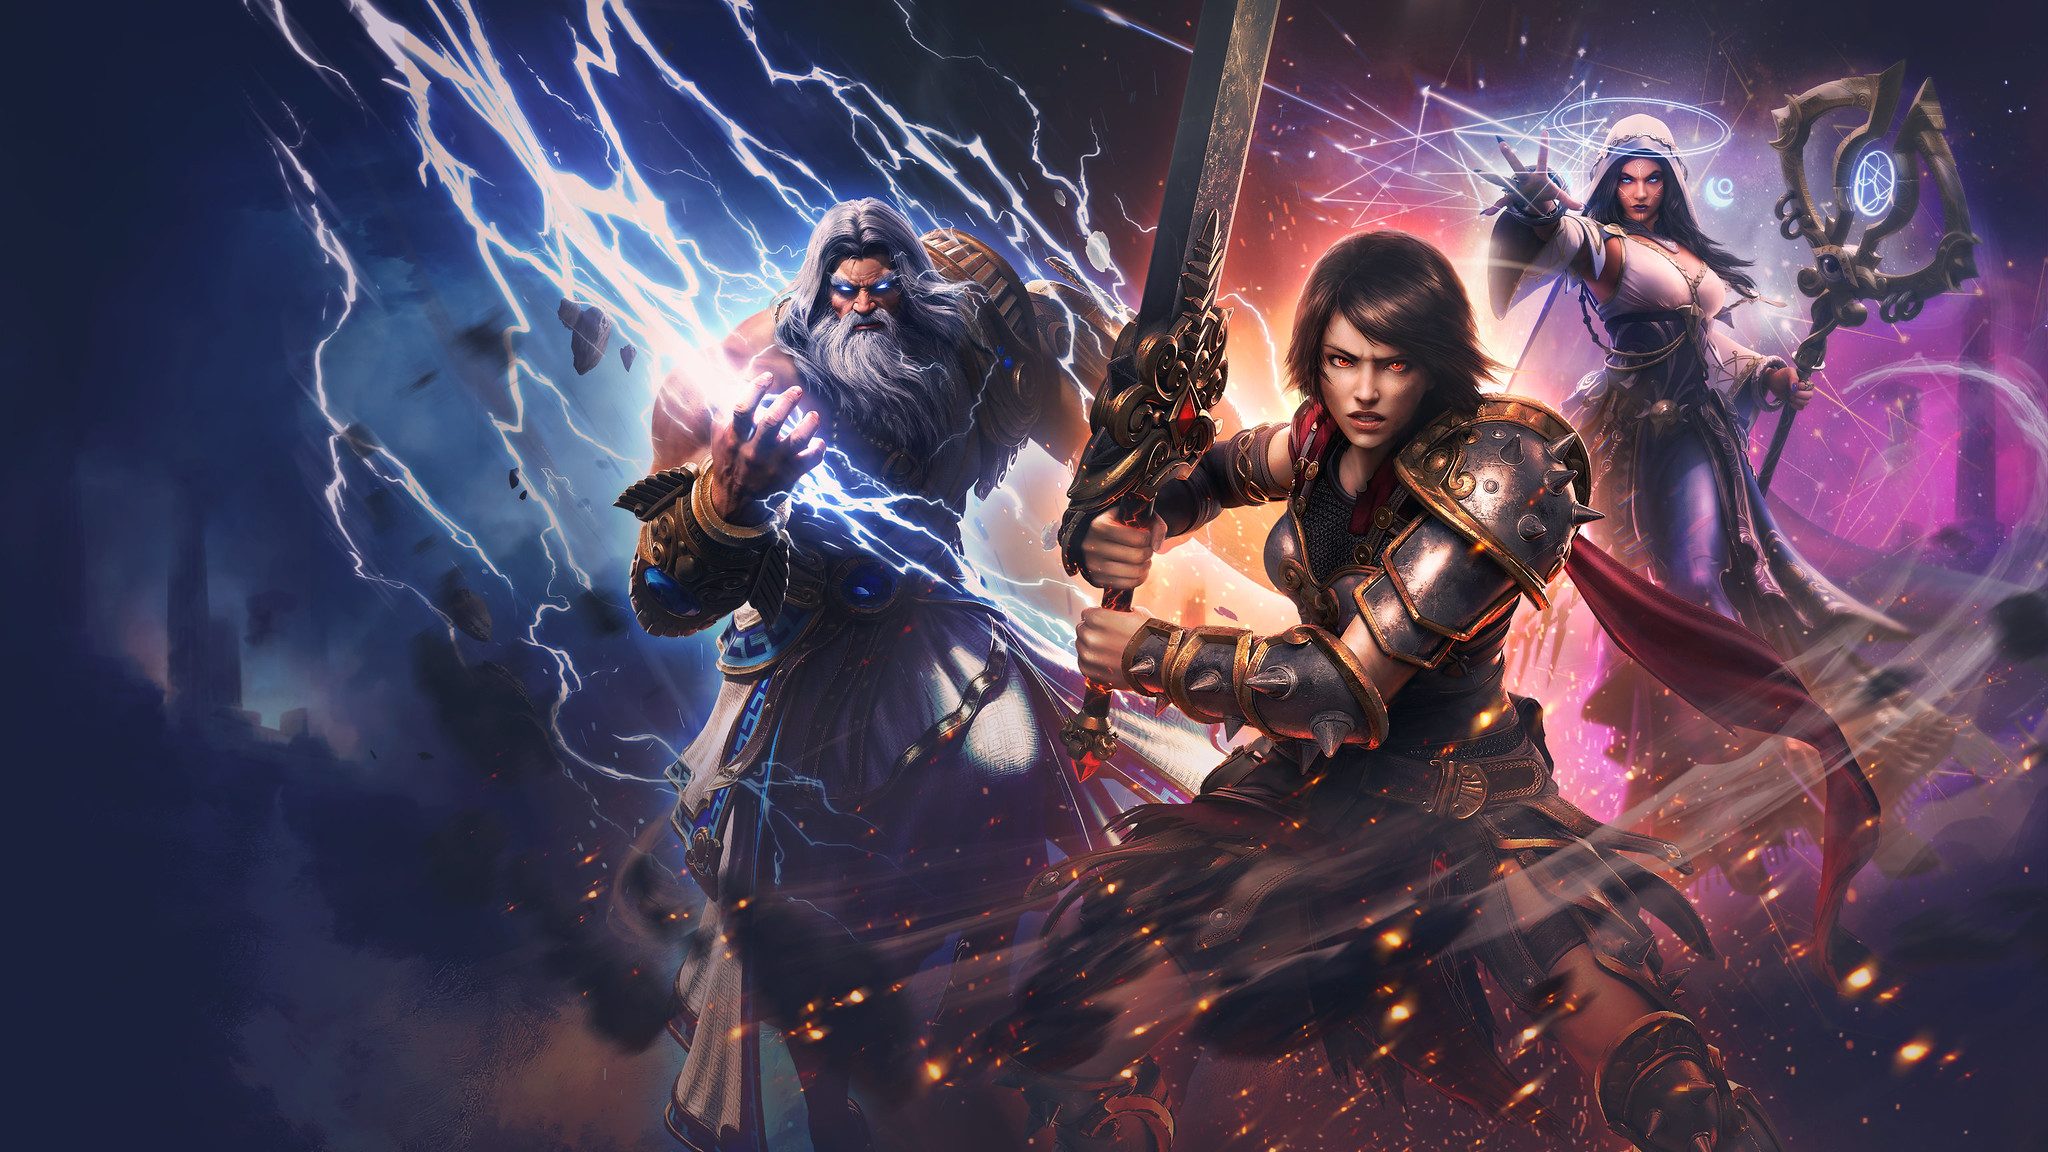 Smite 2 is coming to PlayStation 5 – PlayStation.Blog